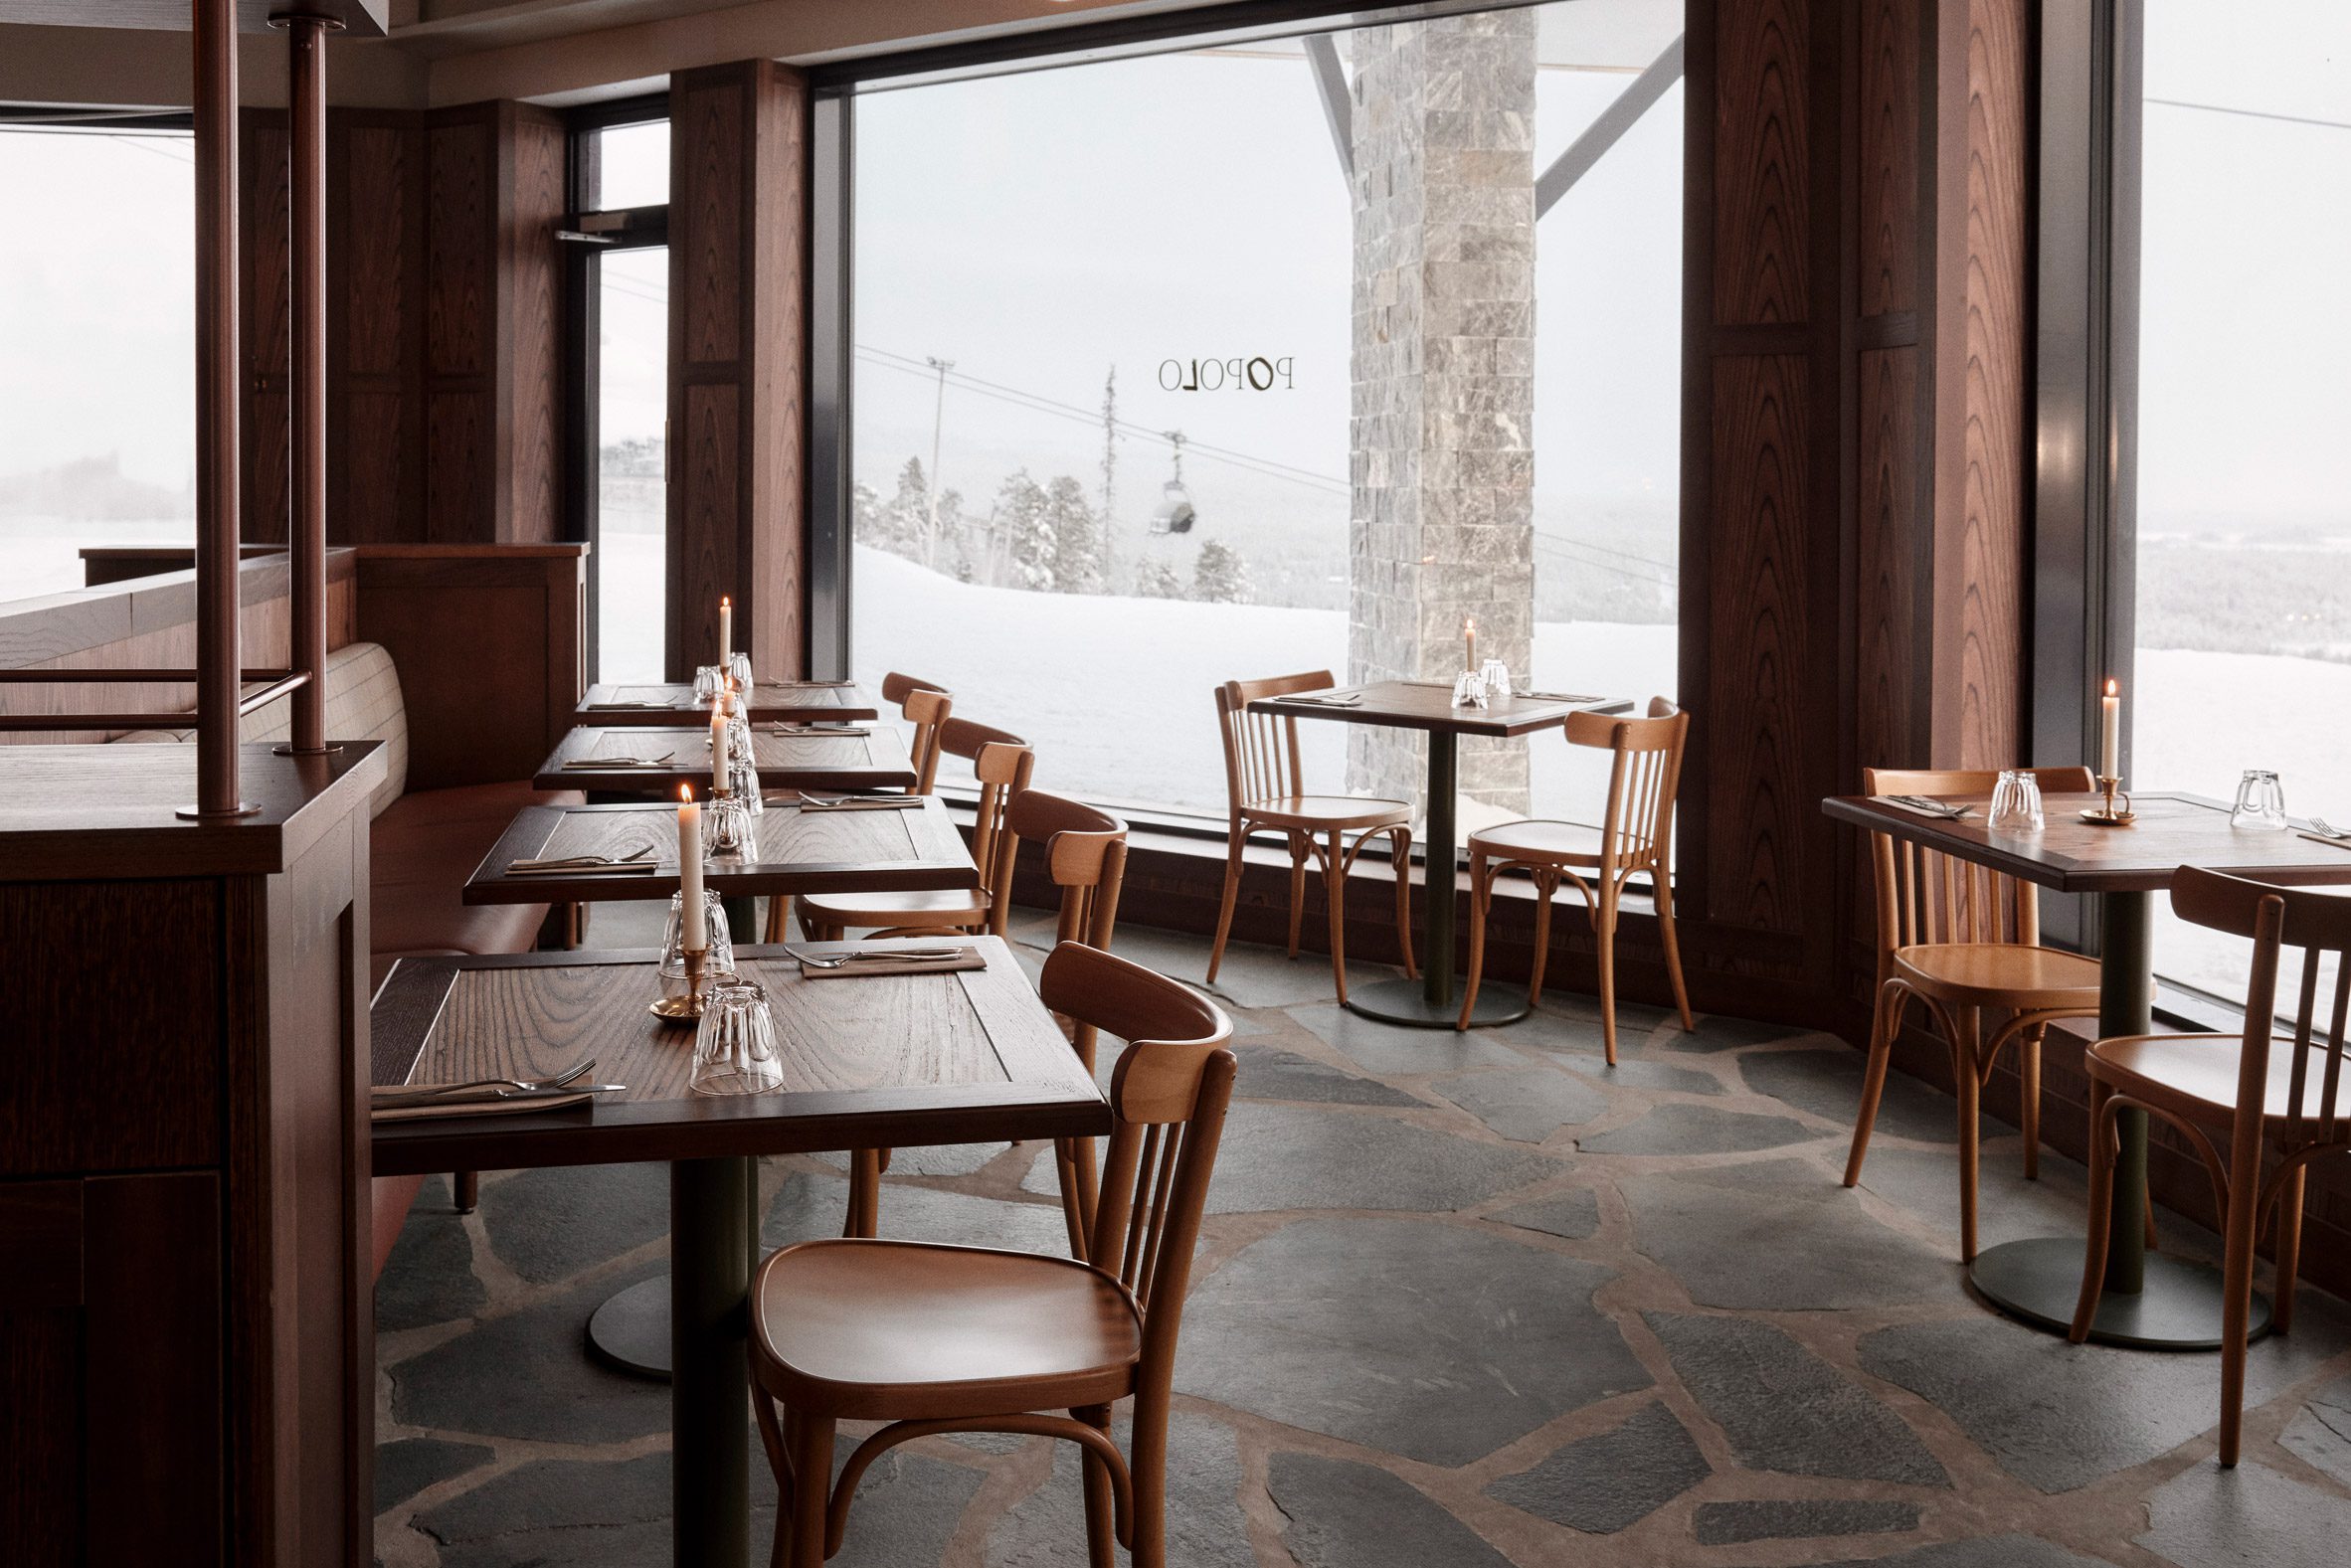 Dining tables and window overlooking ski slopes in Popolo pizza restaurant at Pyhä Ski Resort in Finland